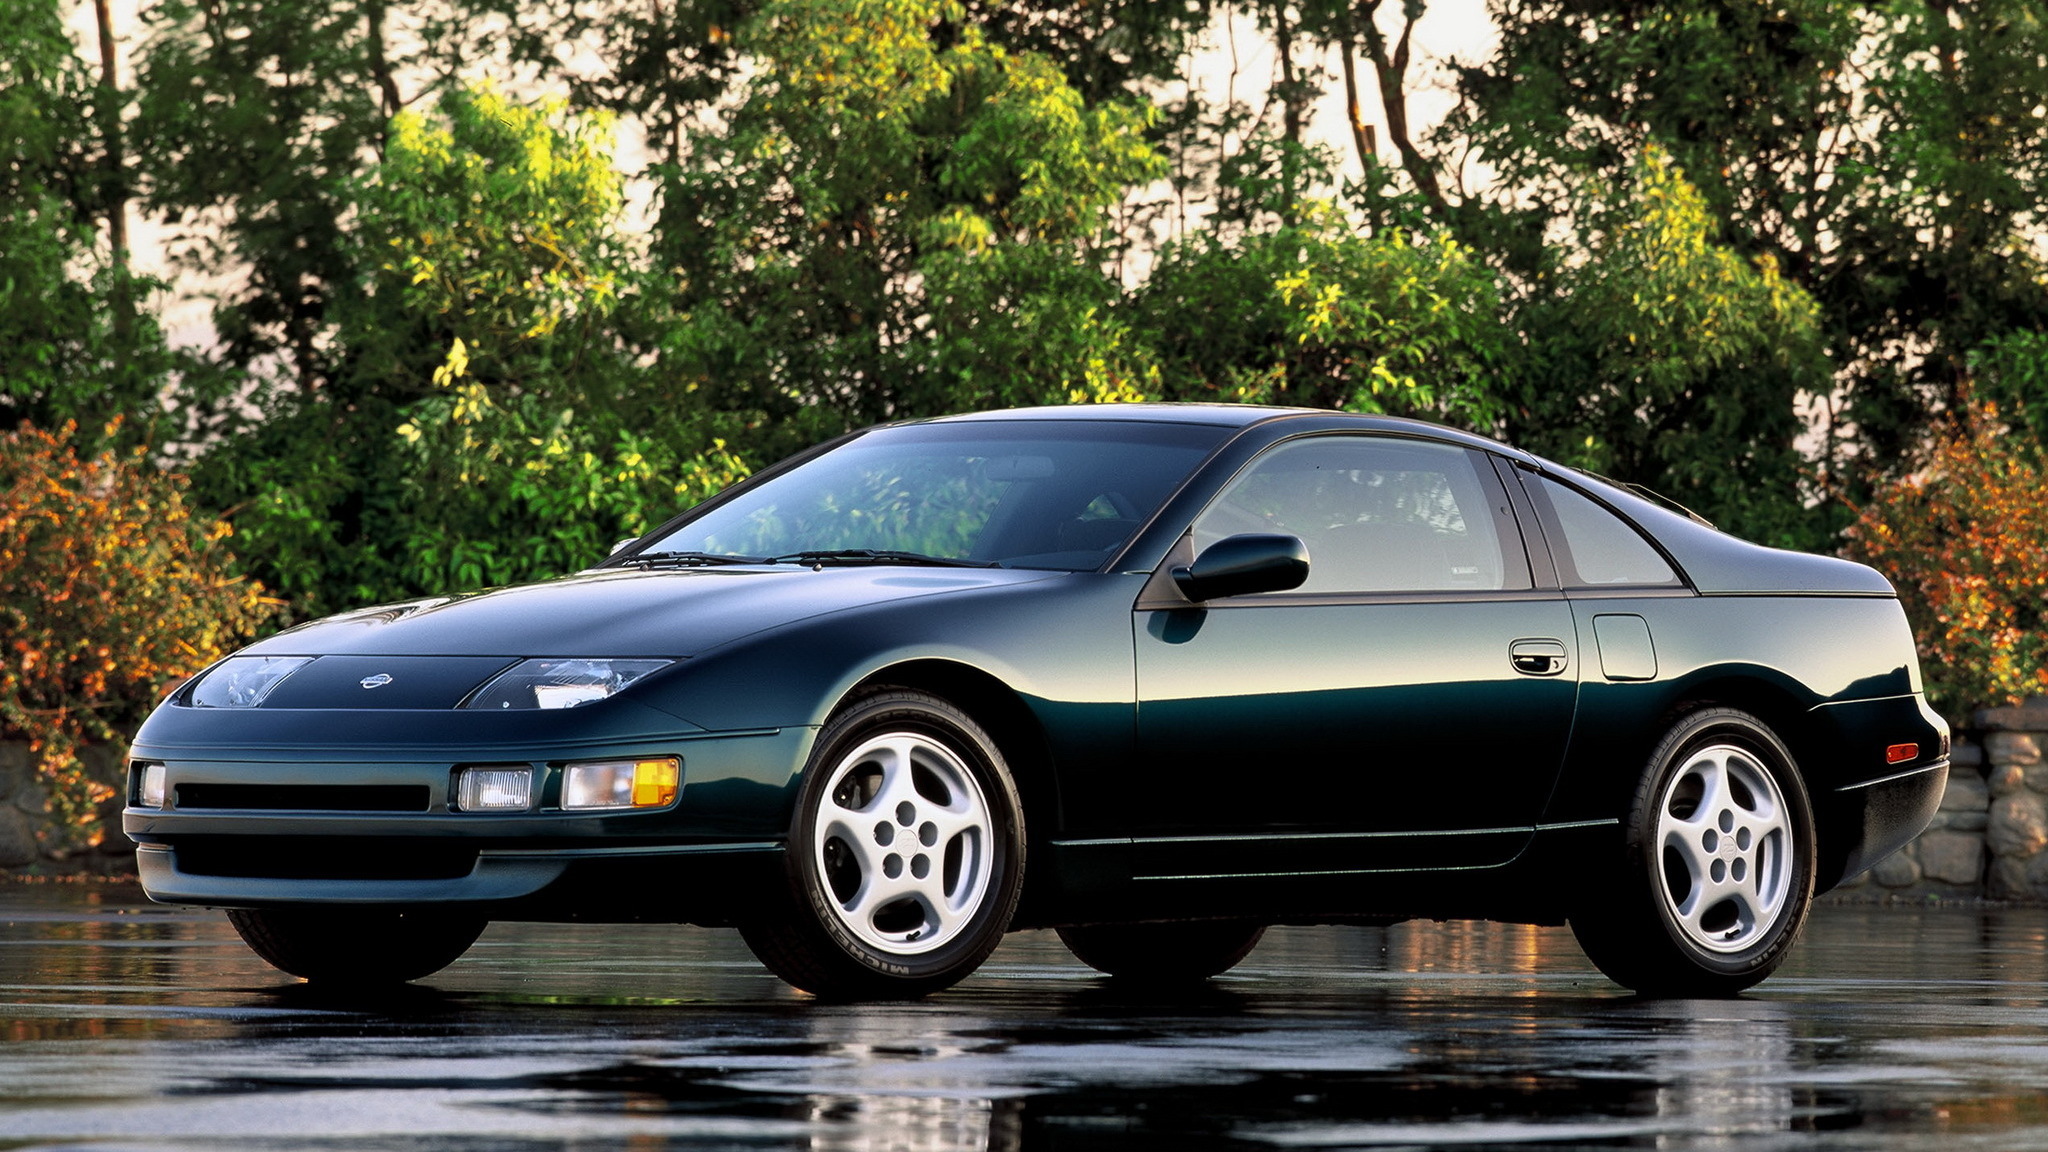 The Nissan Z32 300ZX Happened Because Its Designer Broke The Rules